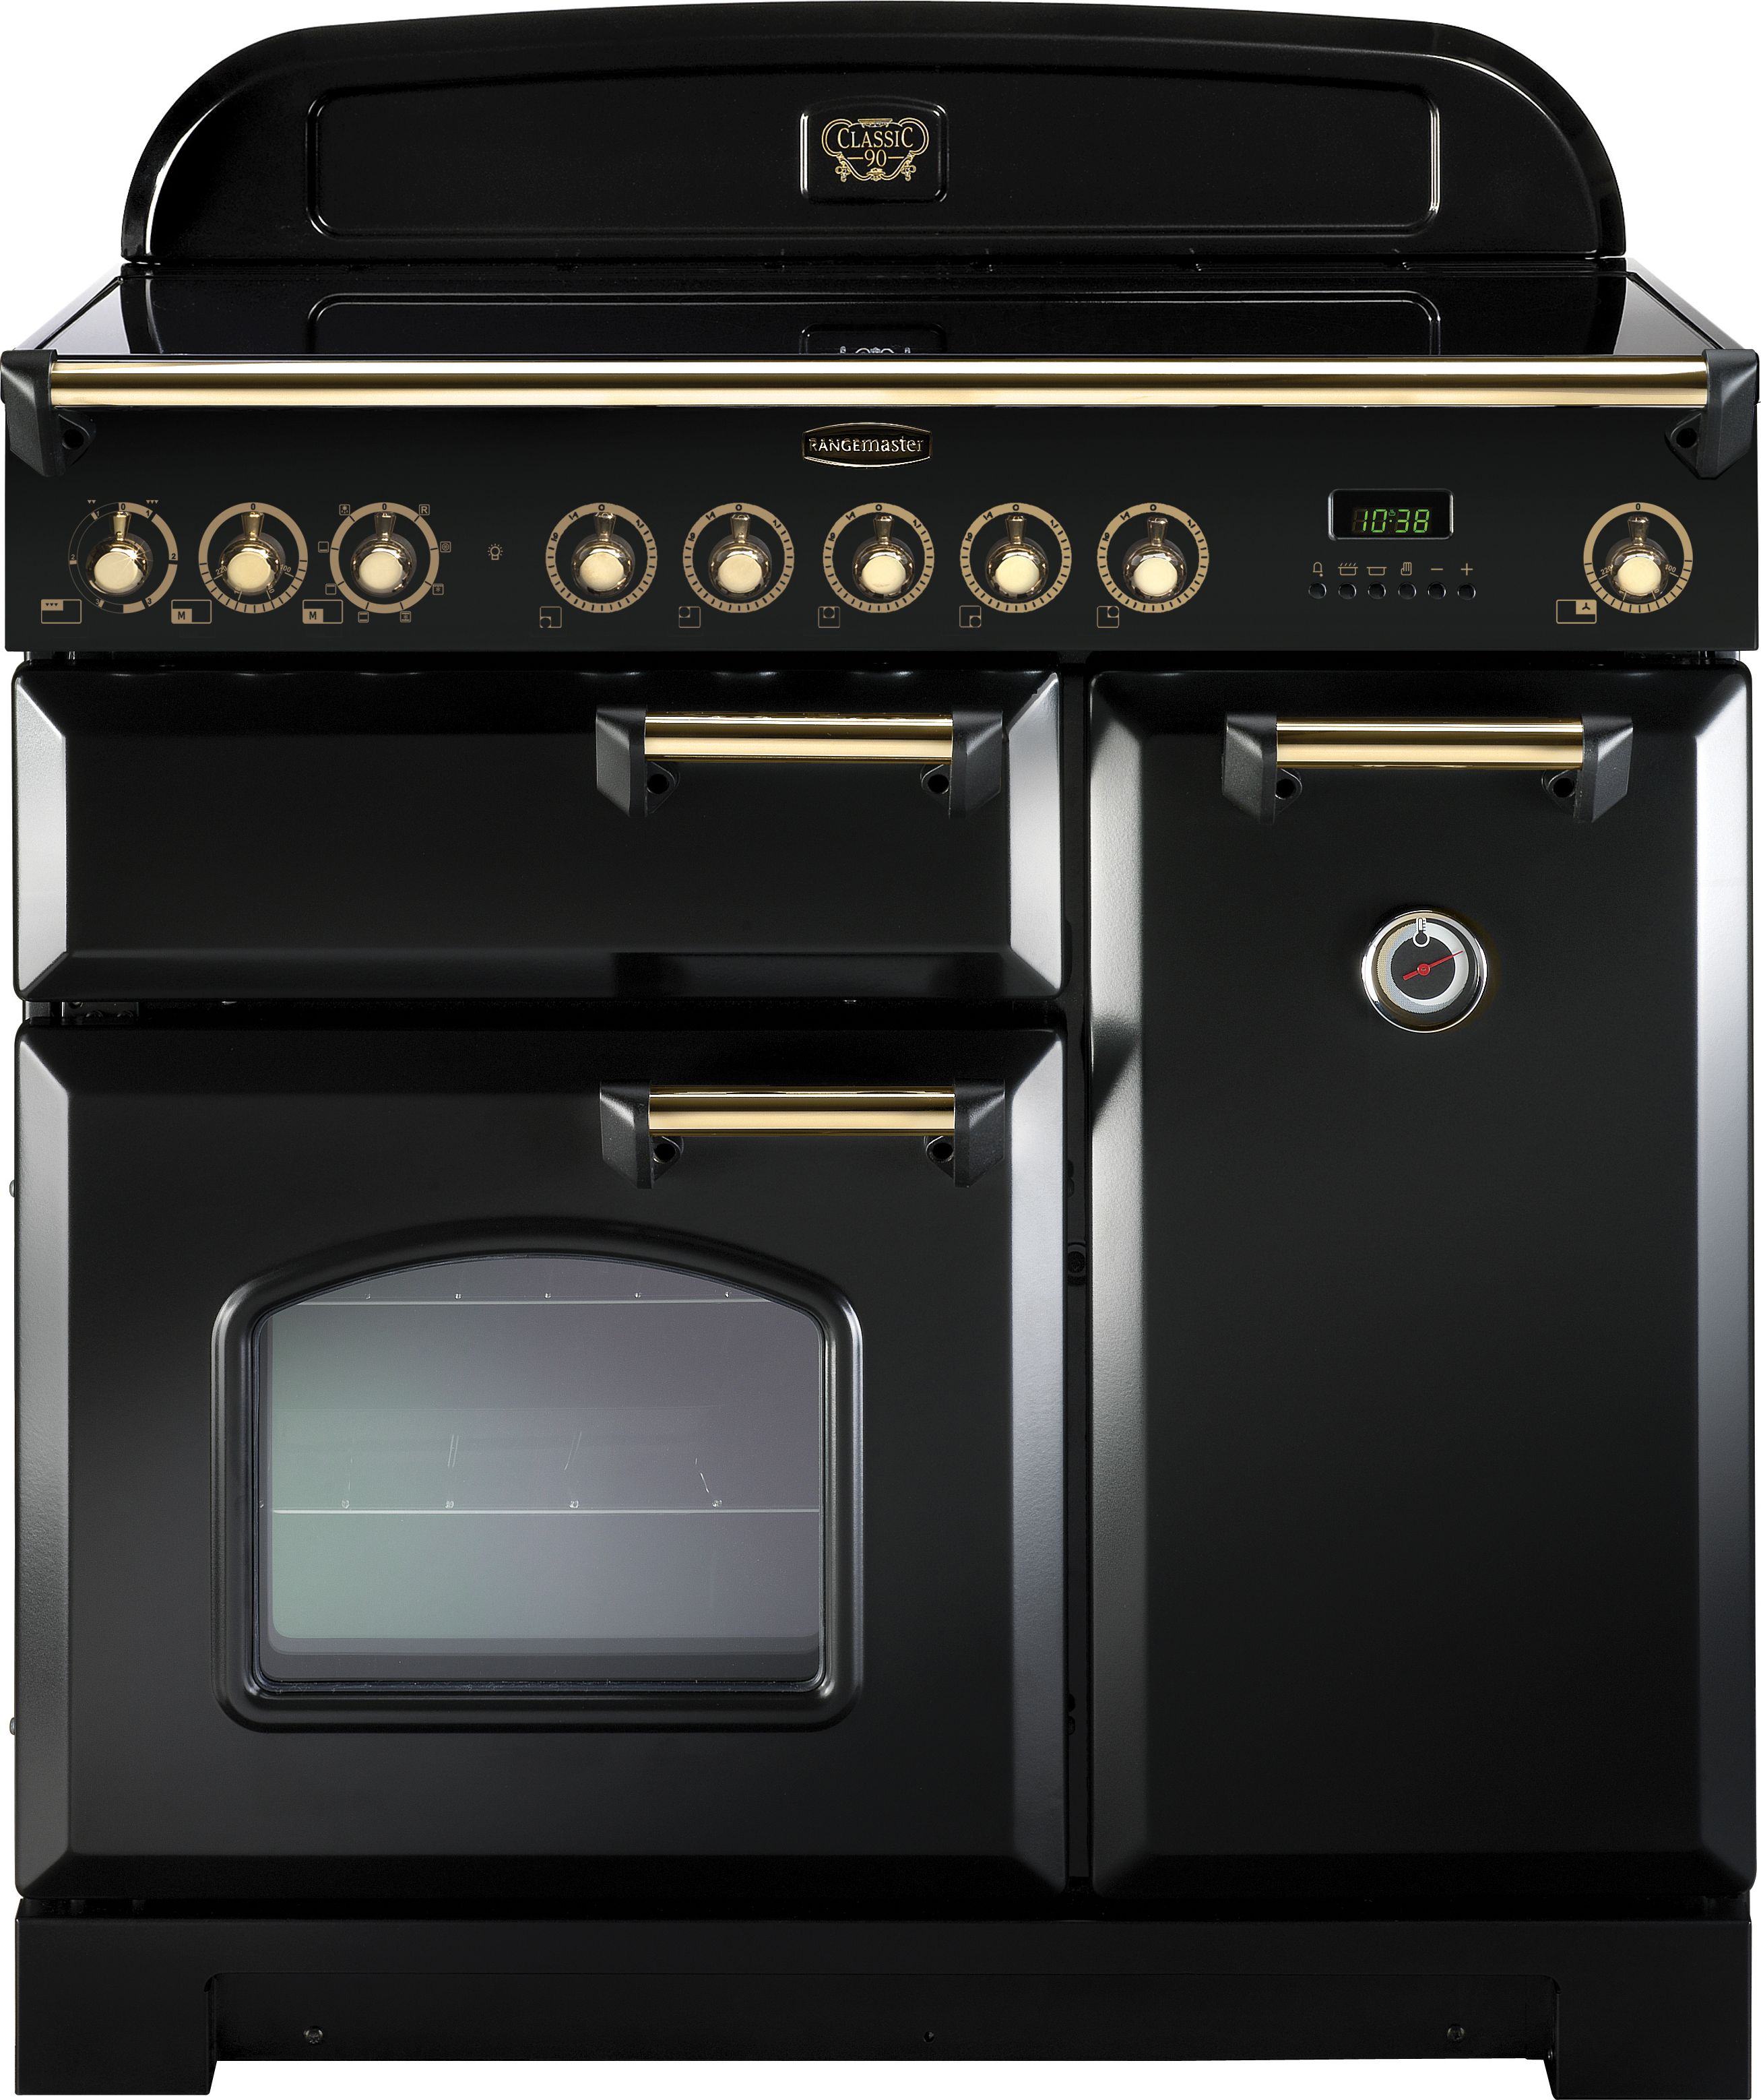 Rangemaster Classic Deluxe CDL90EIBL/B 90cm Electric Range Cooker with Induction Hob - Black / Brass - A/A Rated, Black